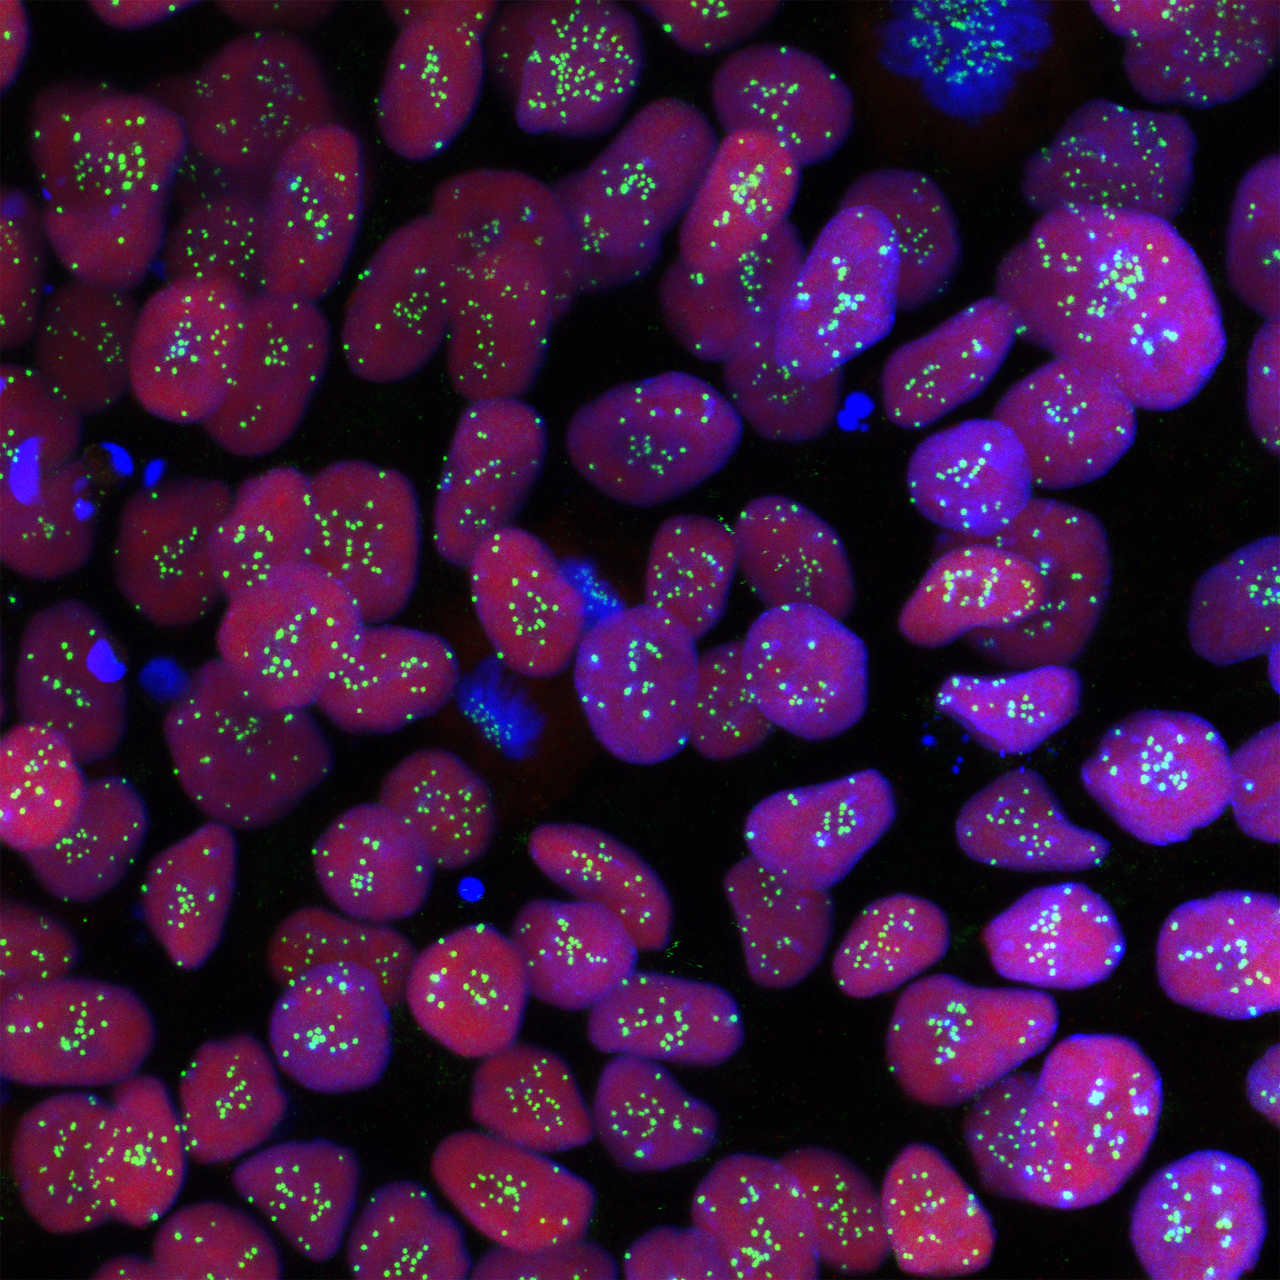 Haploid human embryonic stem cells (Credit: Azrieli Center for Stem Cells and Genetic Research at Hebrew University)